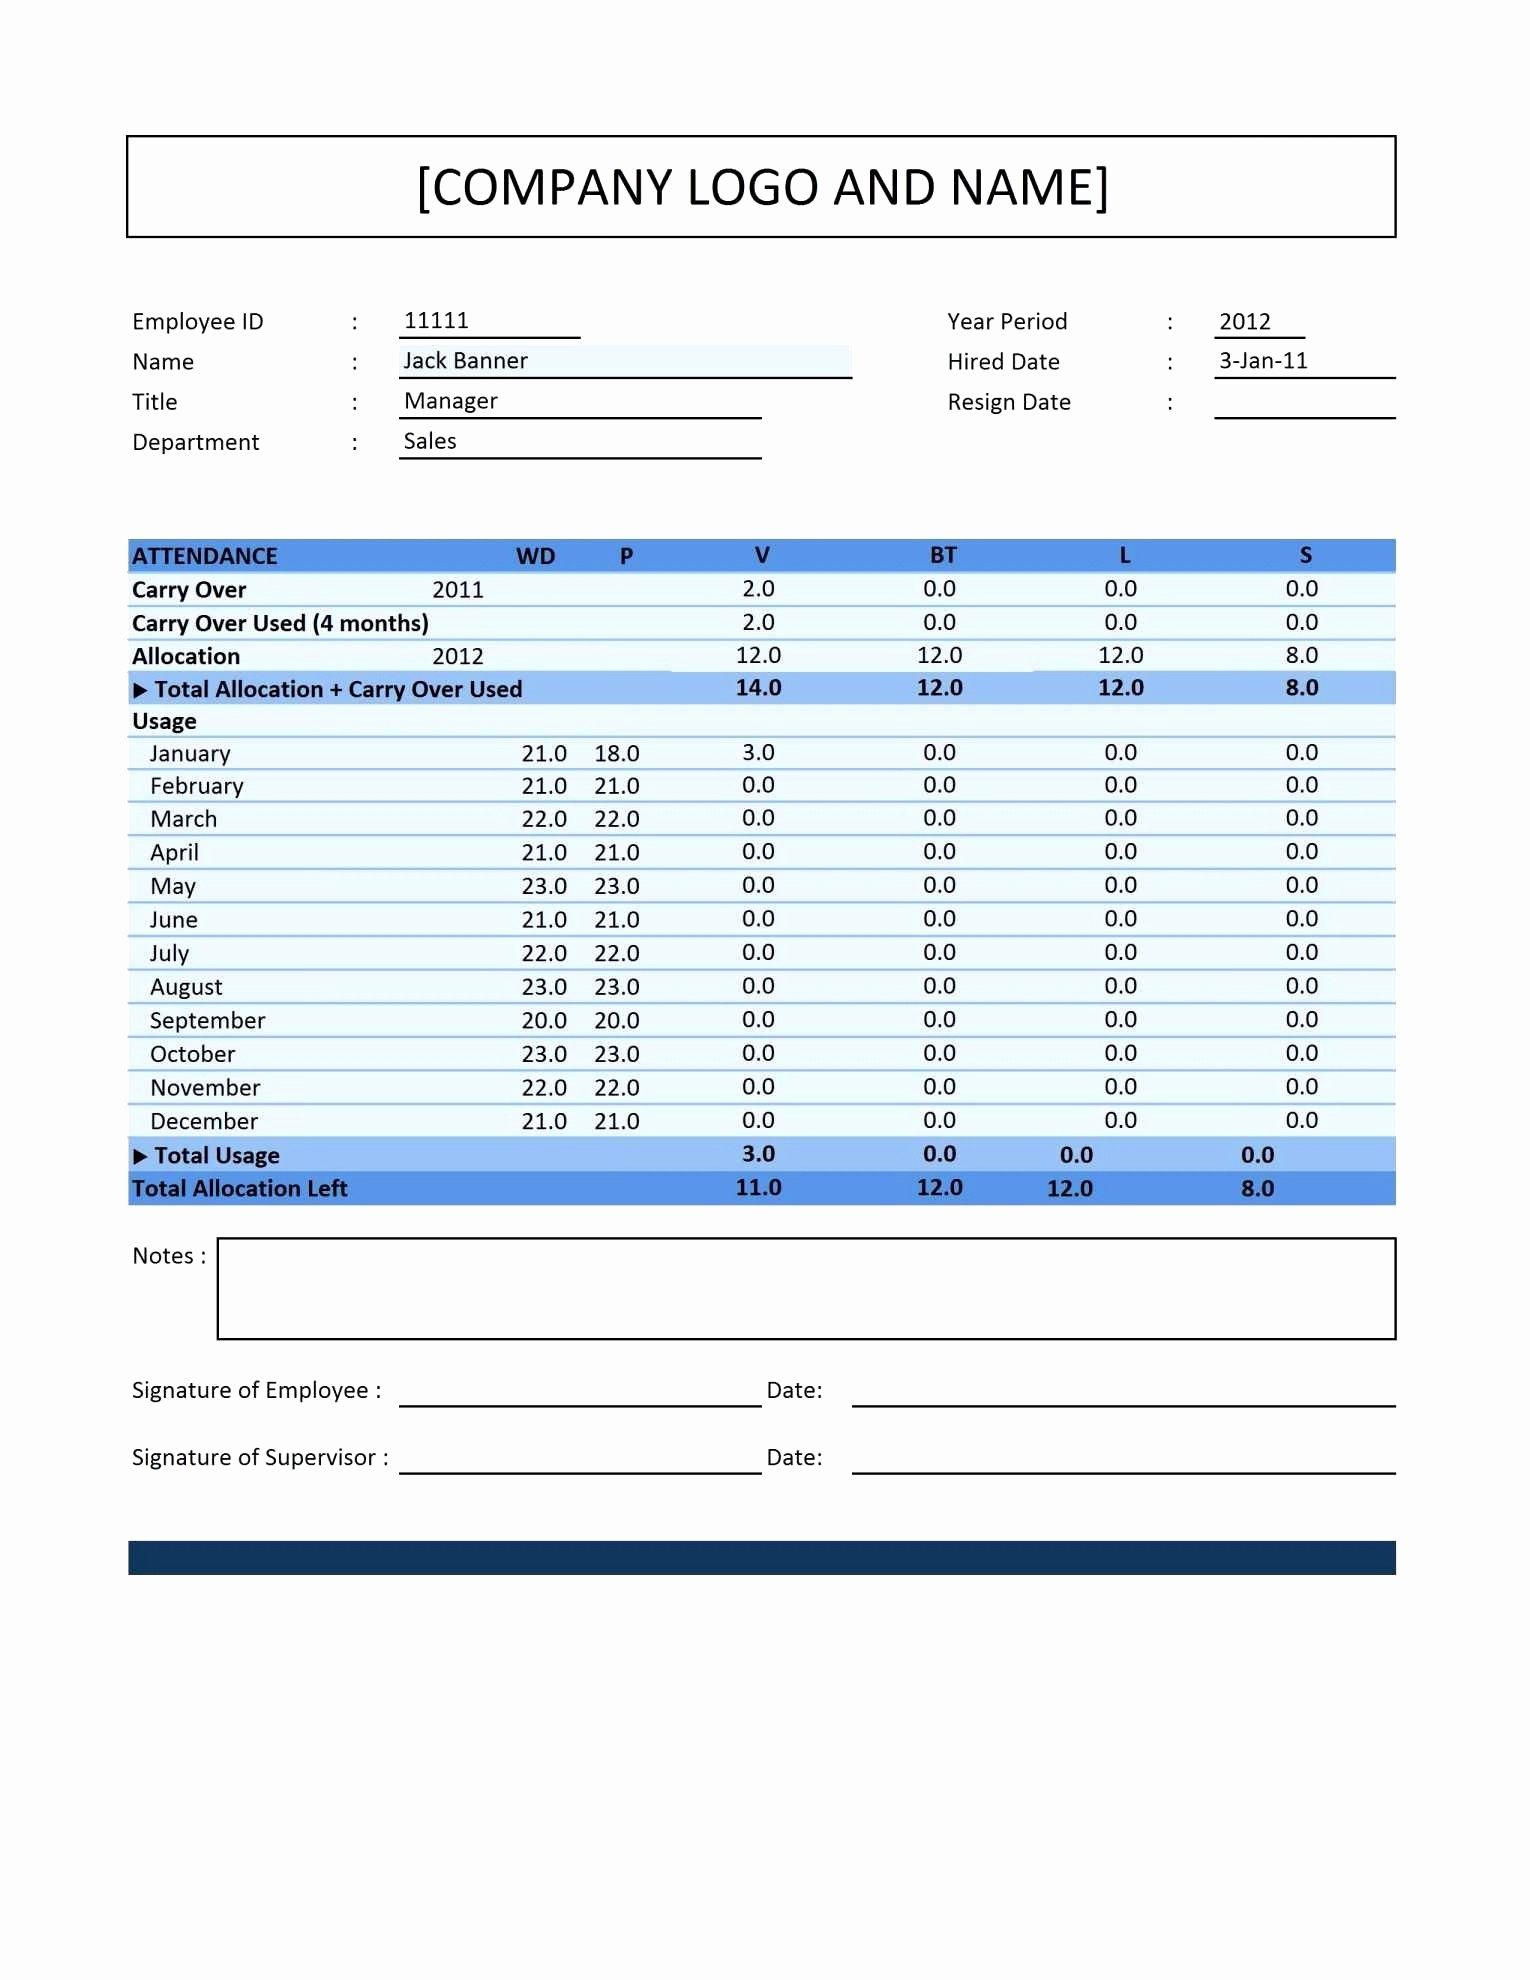 Personal Trainer Spreadsheet Google Spreadshee personal trainer client tracking ...1530 x 1980